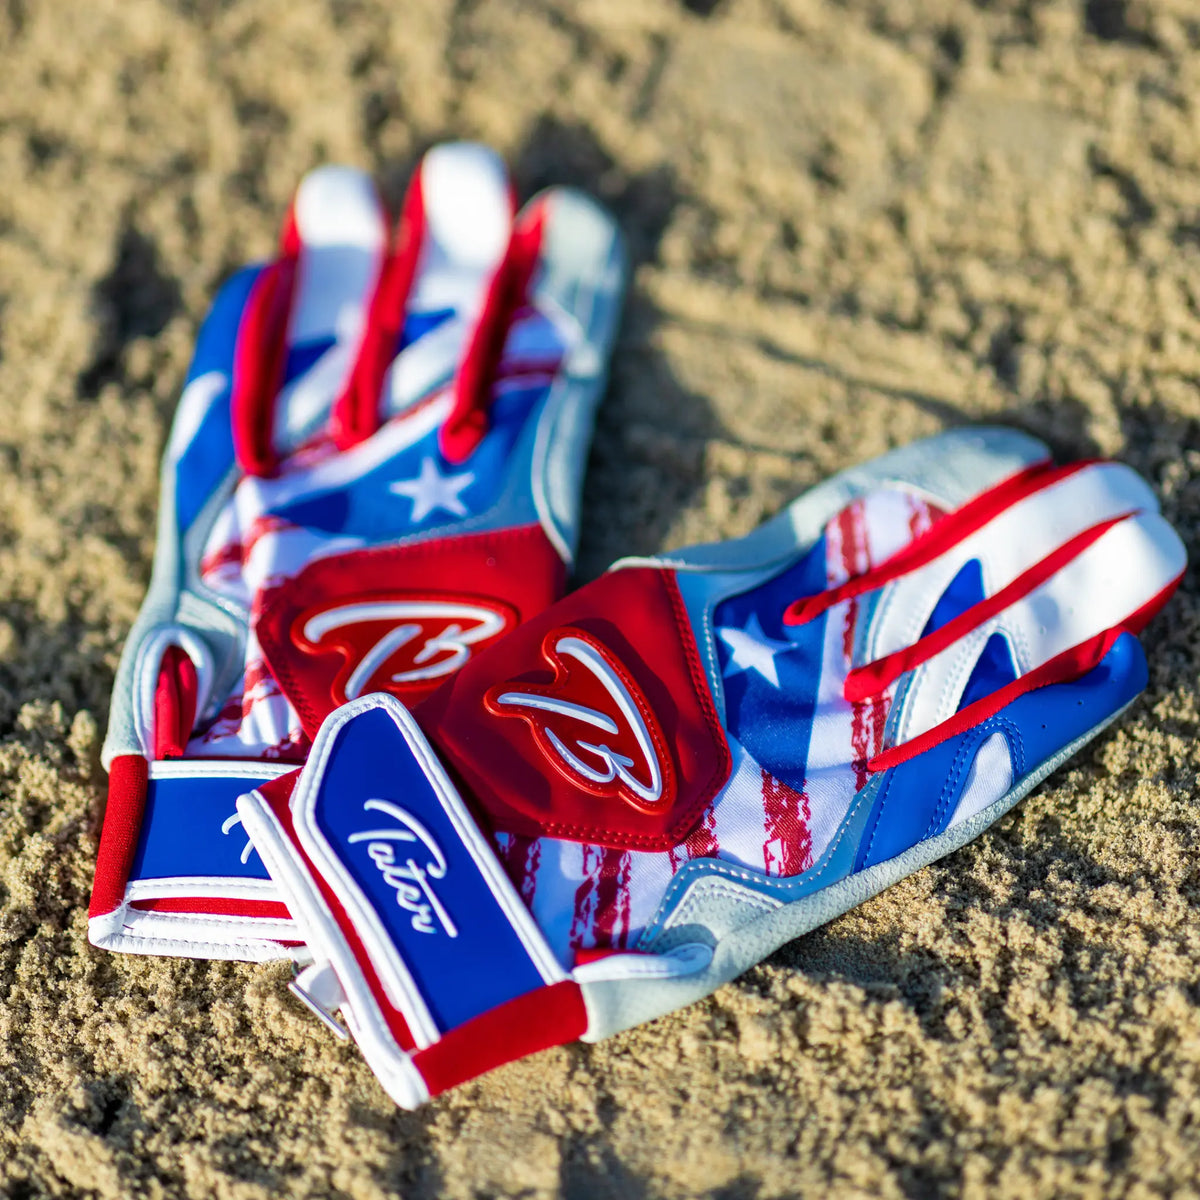 Tater batting gloves with a vibrant Puerto Rican flag design resting on the sandy texture of a baseball field, symbolizing the fusion of cultural pride and sport.